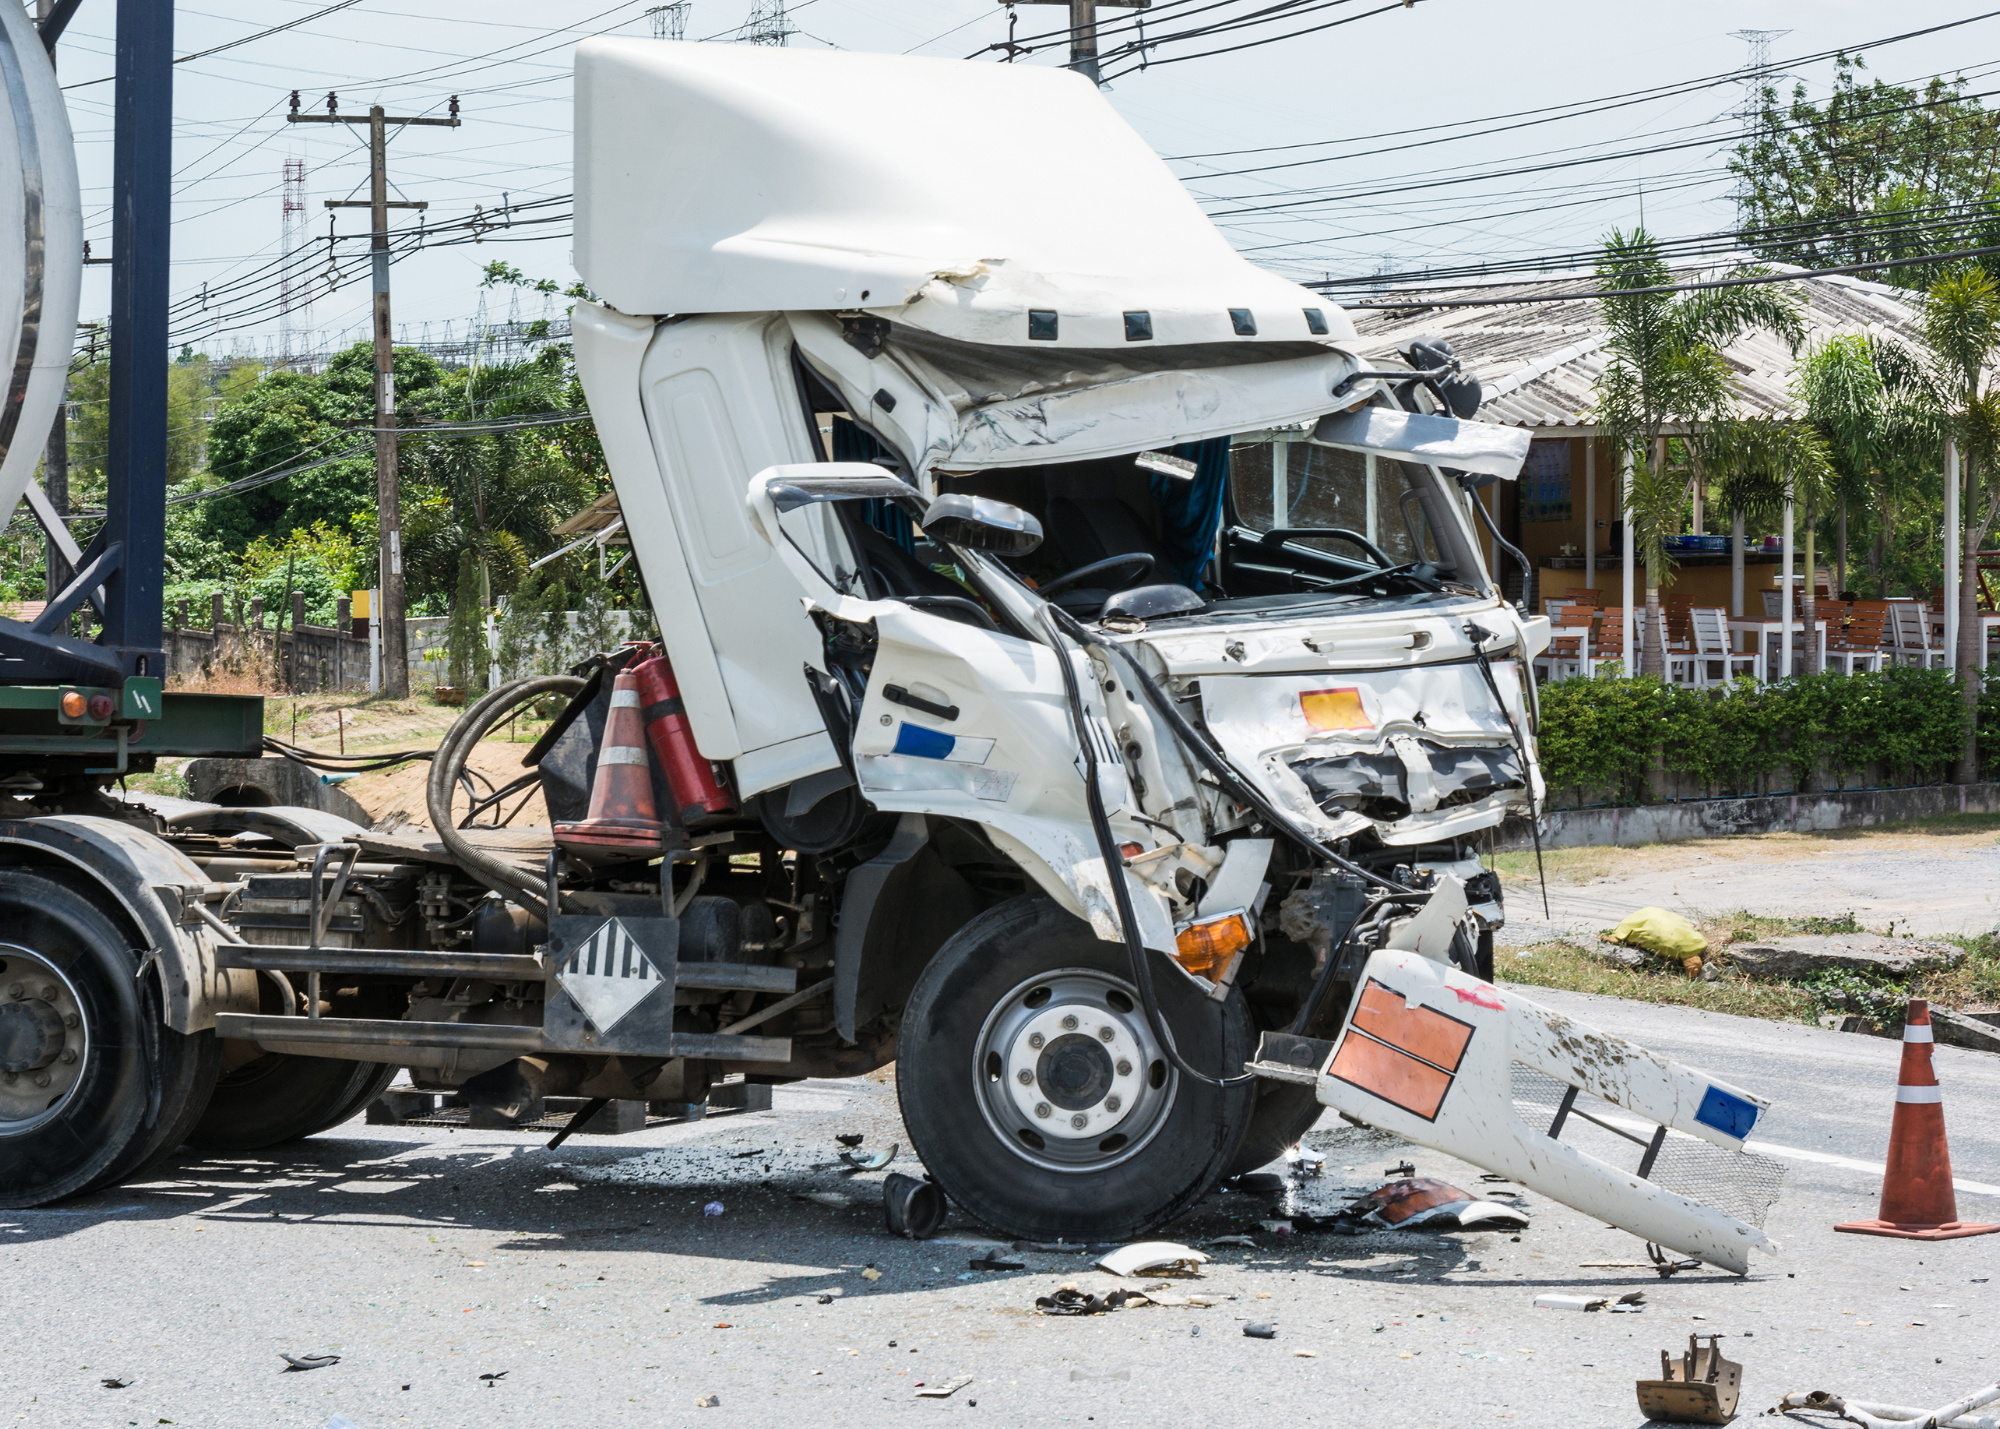 Large Truck Accident - Truck Accident Lawyer NC